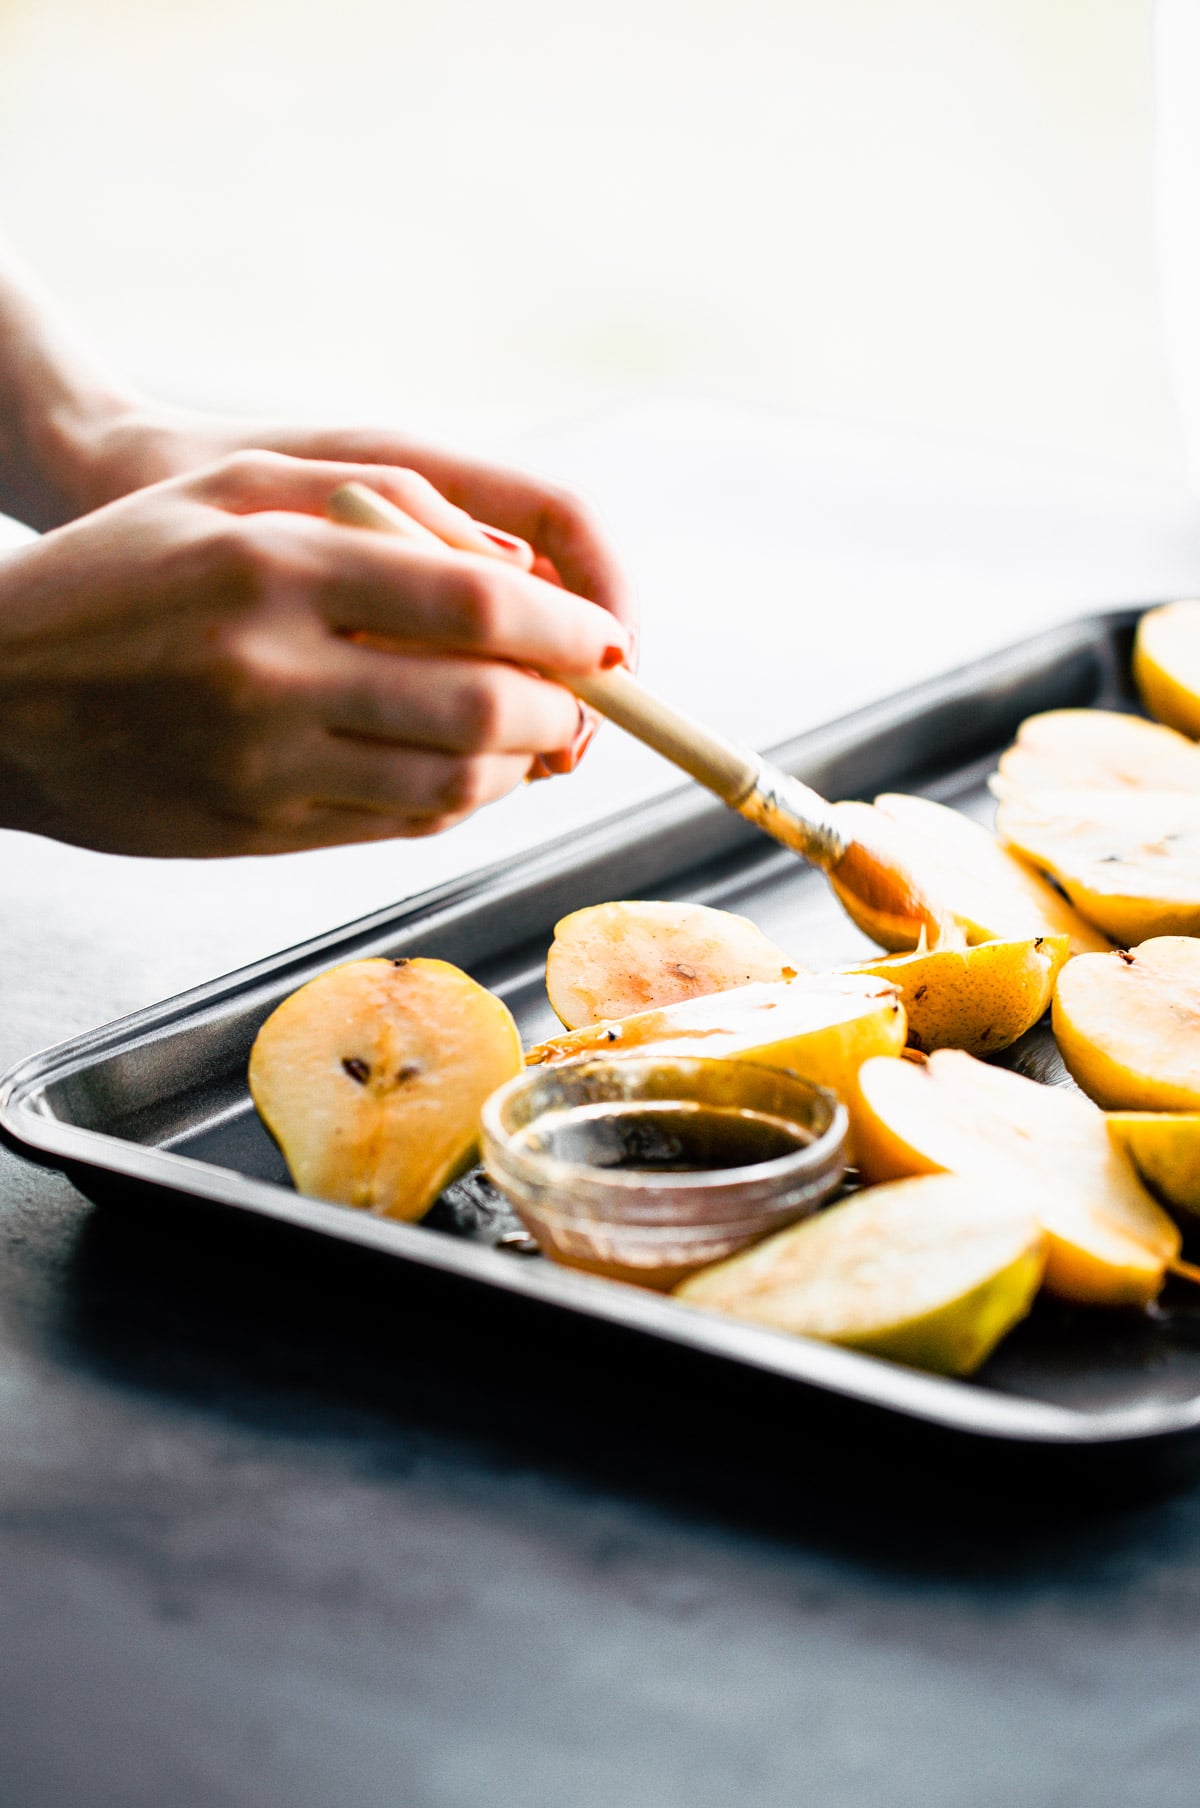 A hand brushing glaze on pear halves on baking sheet for. baked pears.